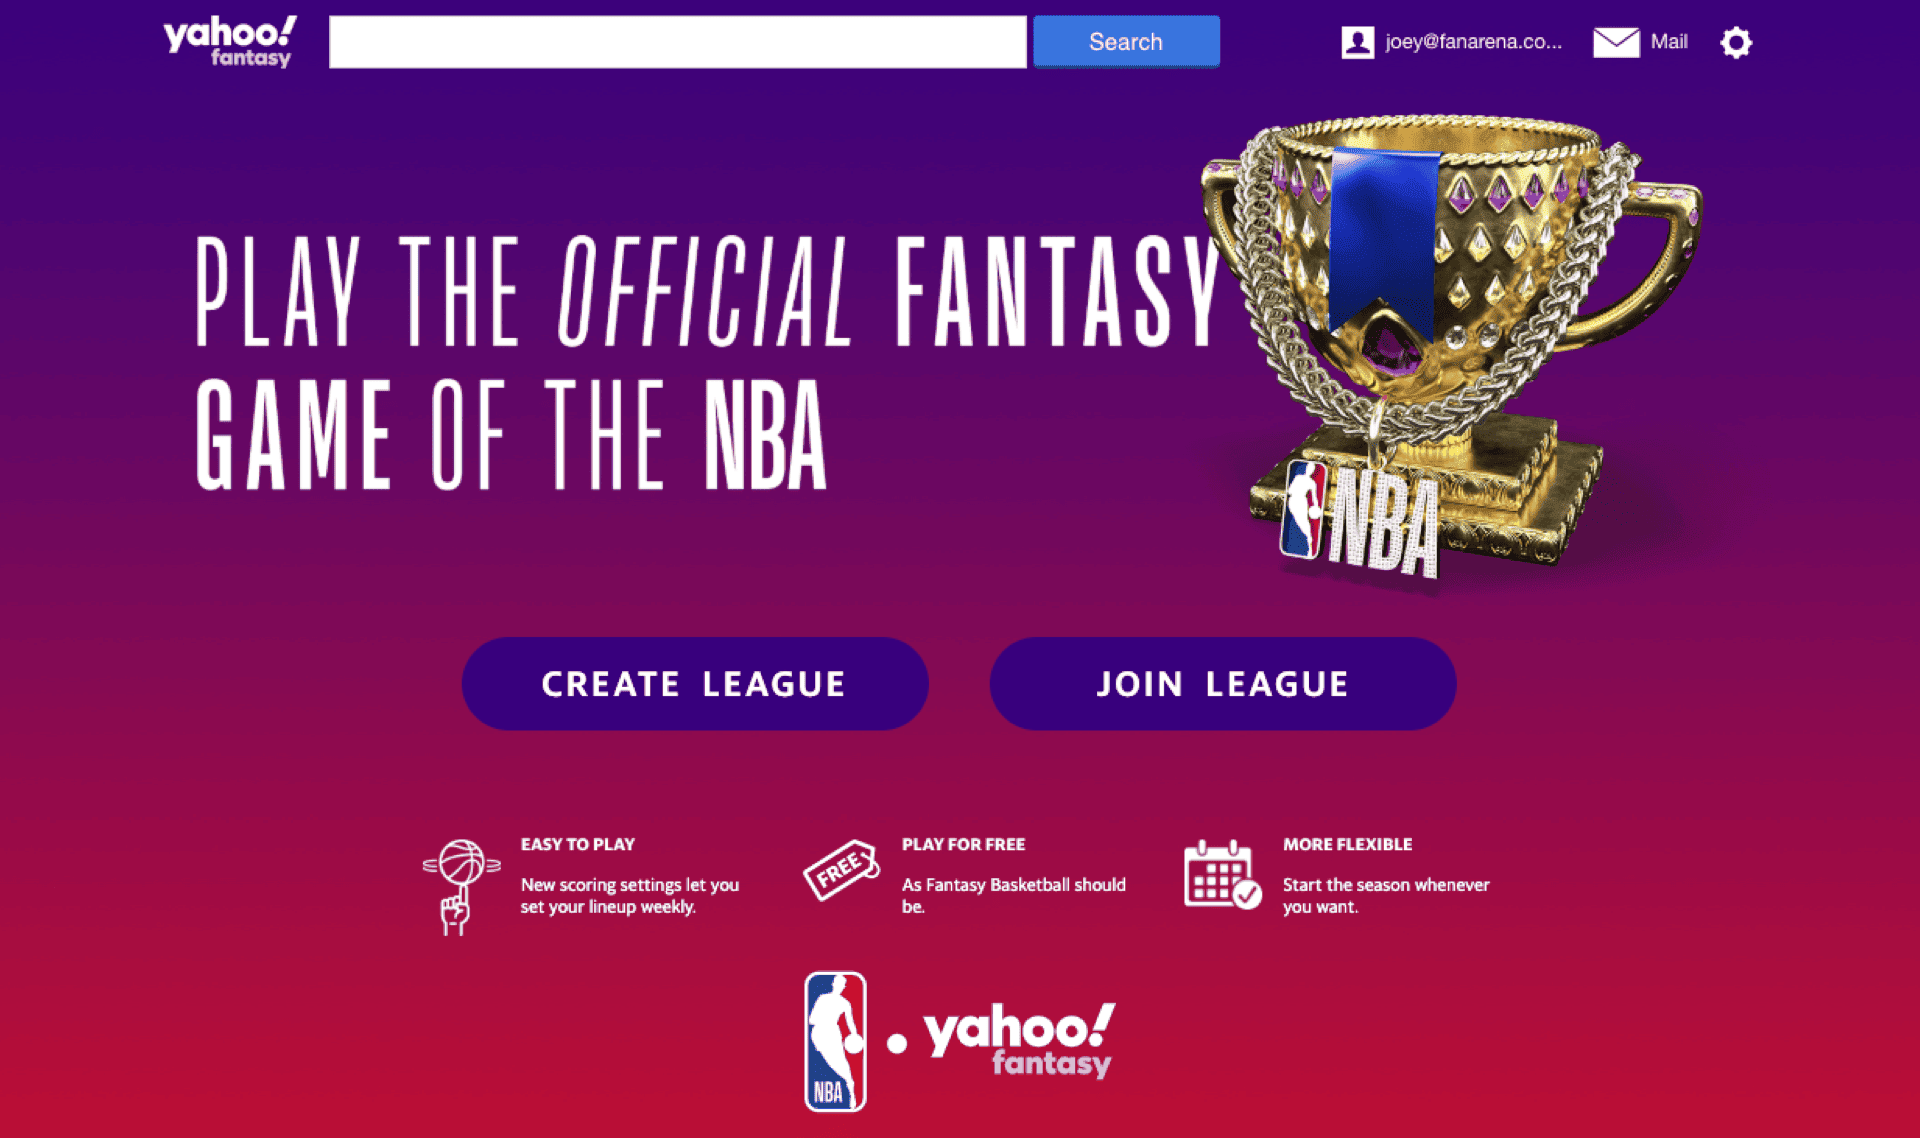 How does the NBA make use of fantasy basketball games?